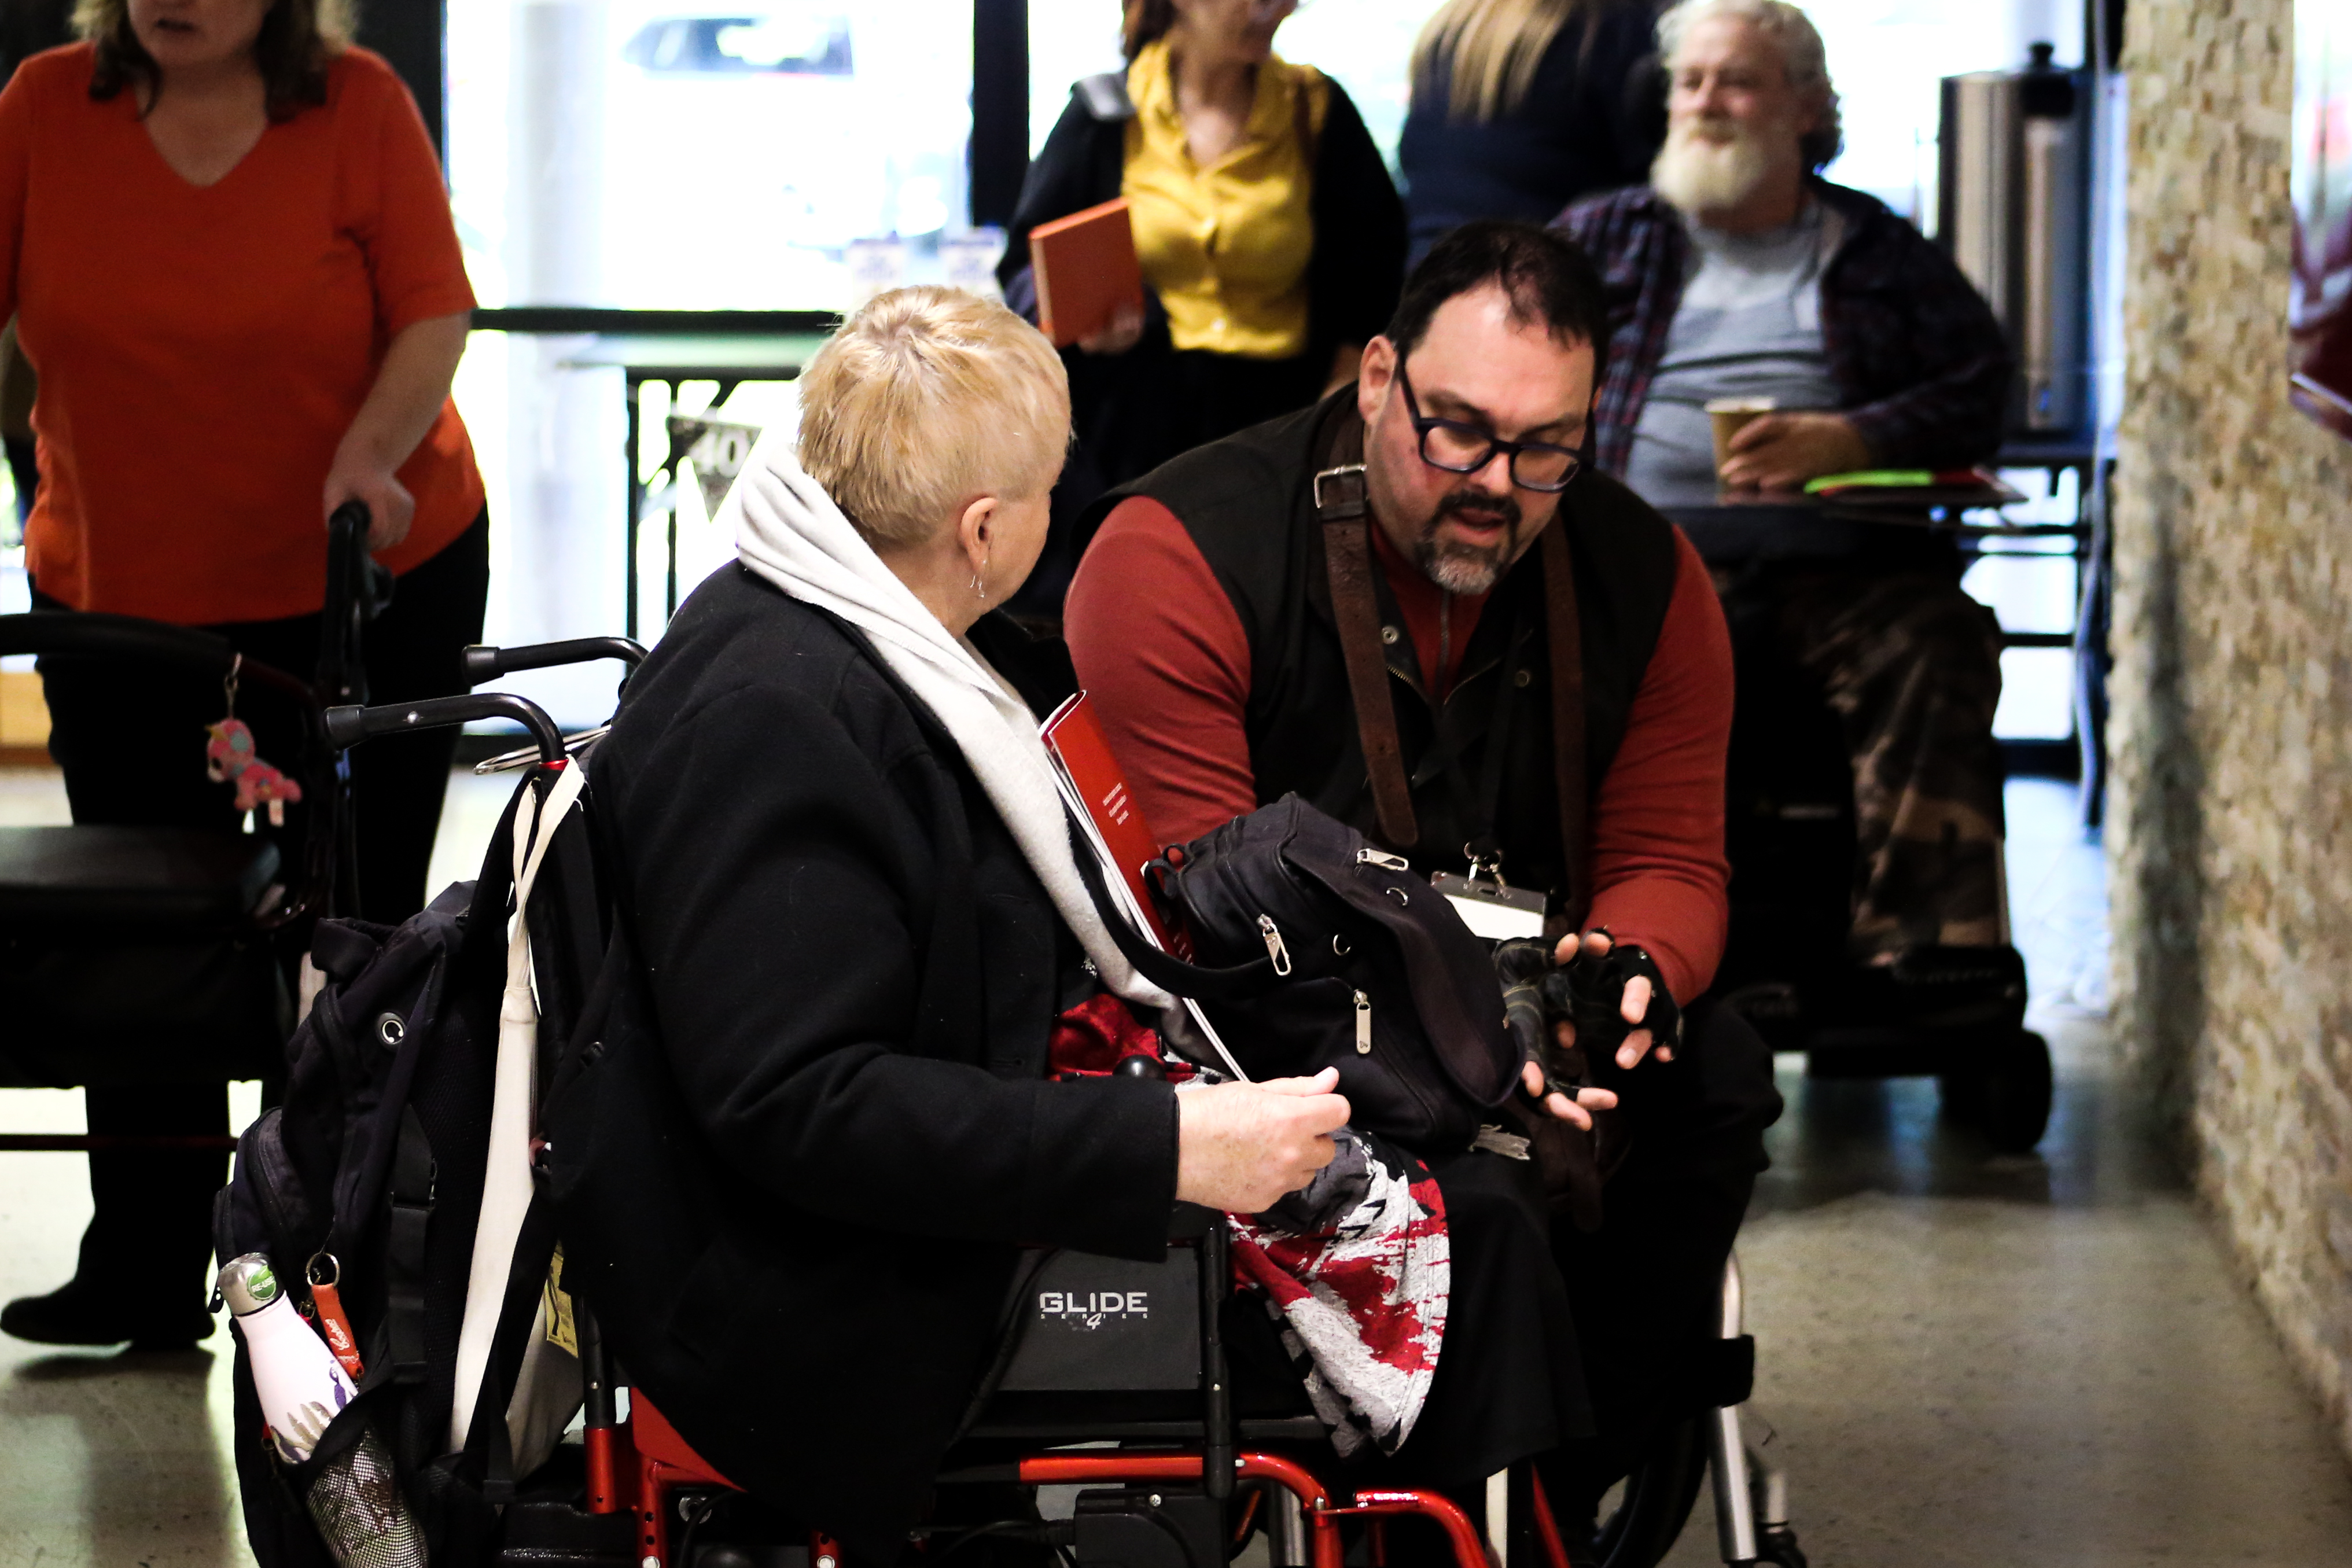 Two PWdWA members deep in conversation at a PWdWA event.